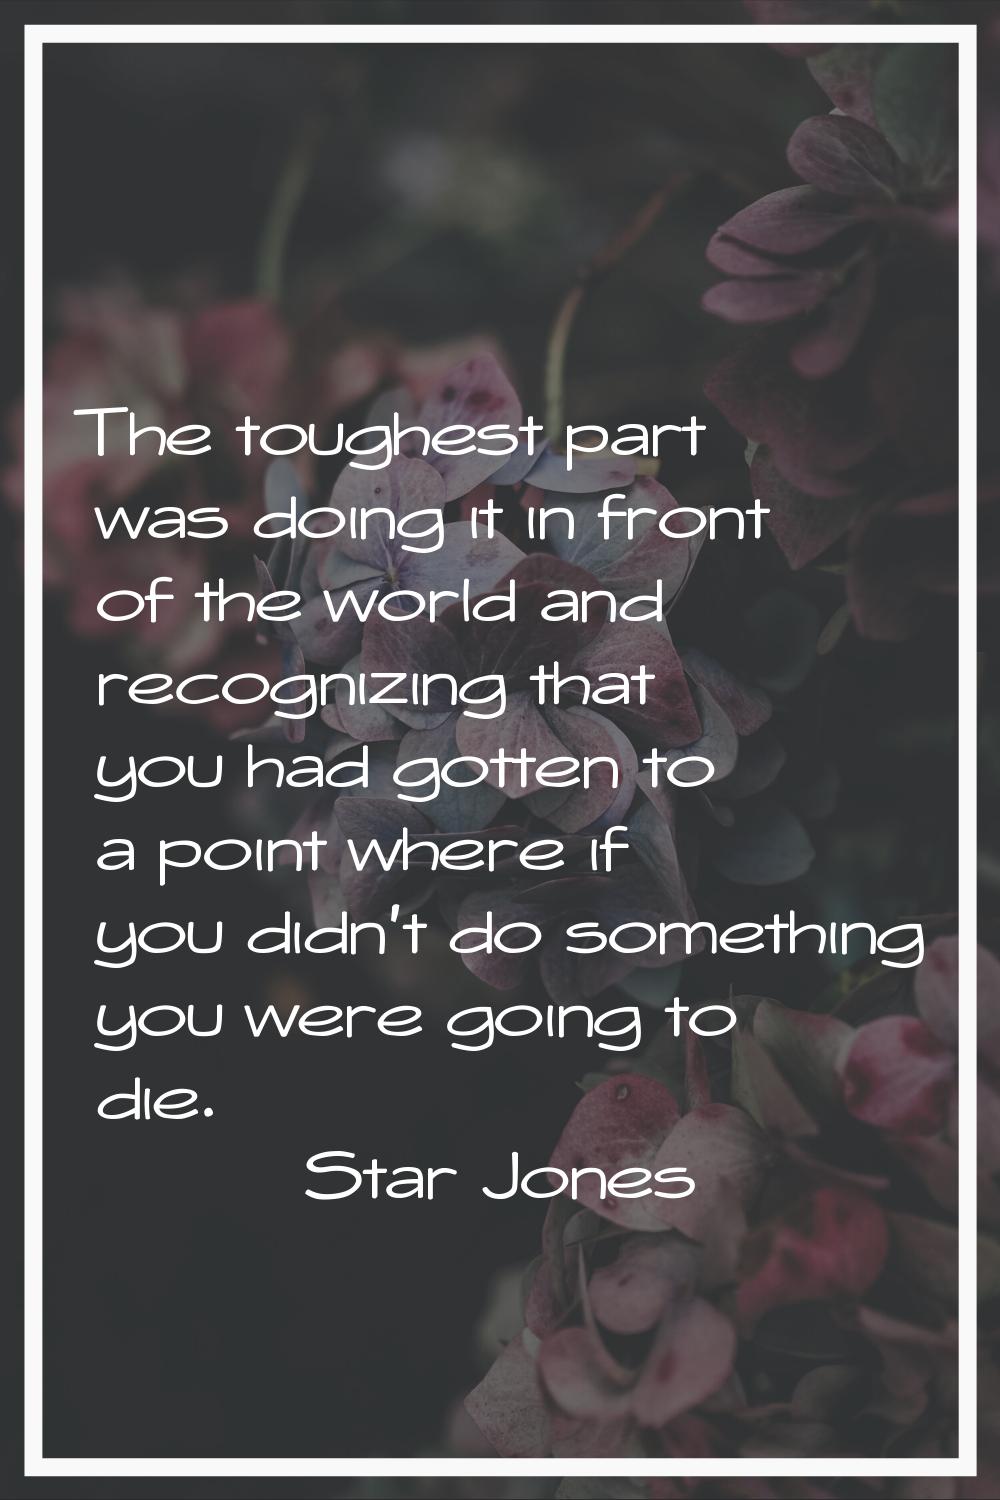 The toughest part was doing it in front of the world and recognizing that you had gotten to a point